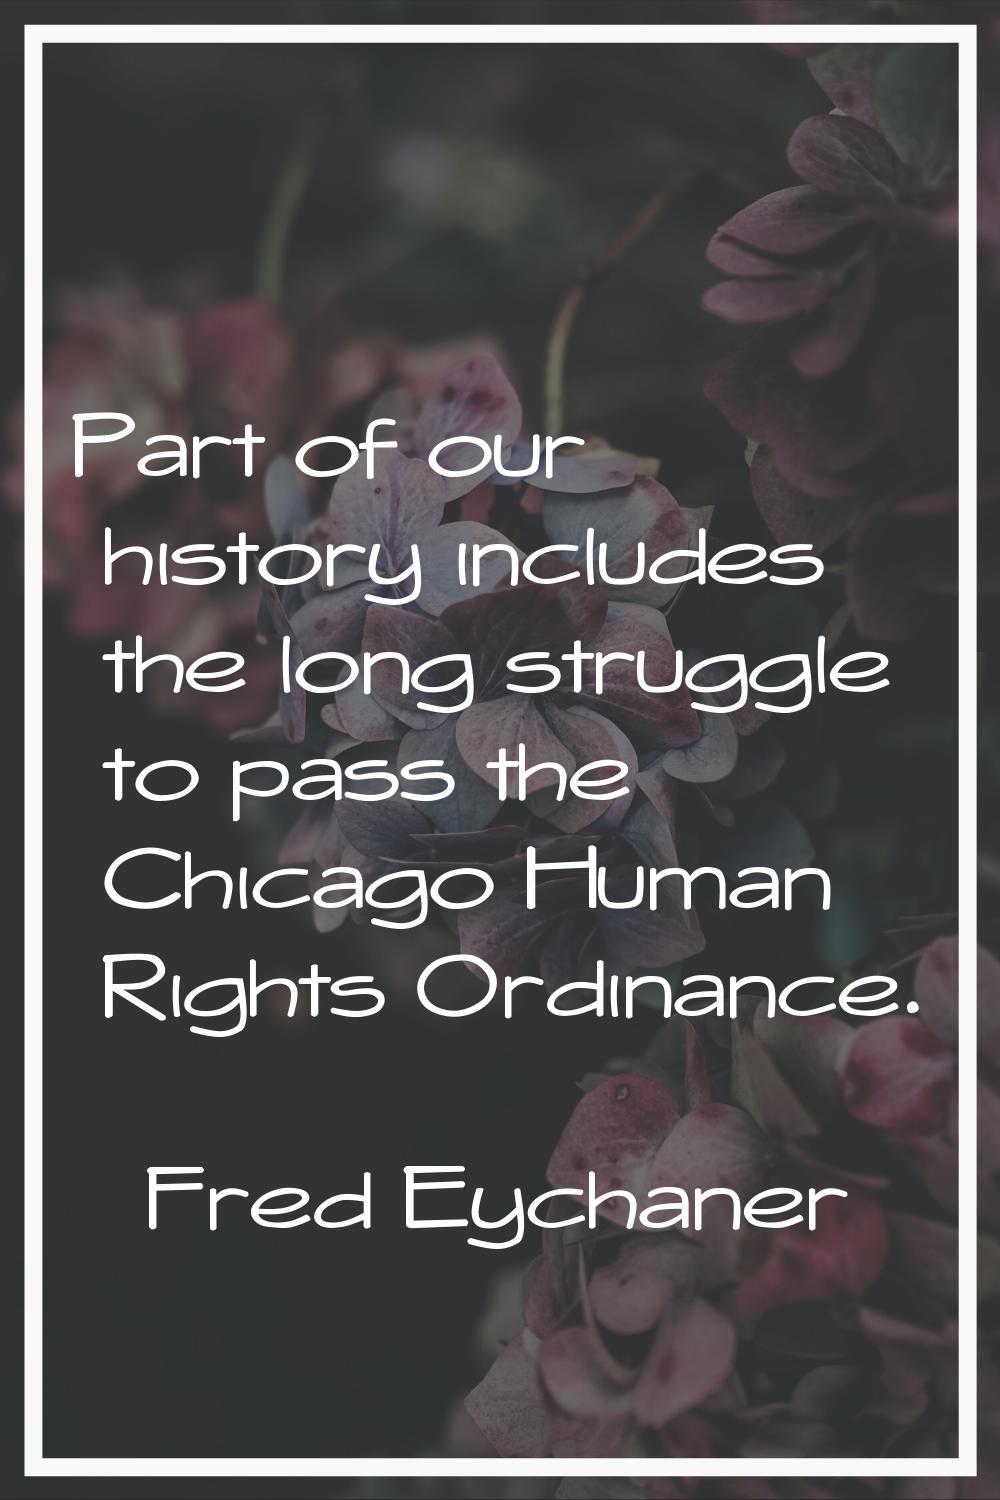 Part of our history includes the long struggle to pass the Chicago Human Rights Ordinance.